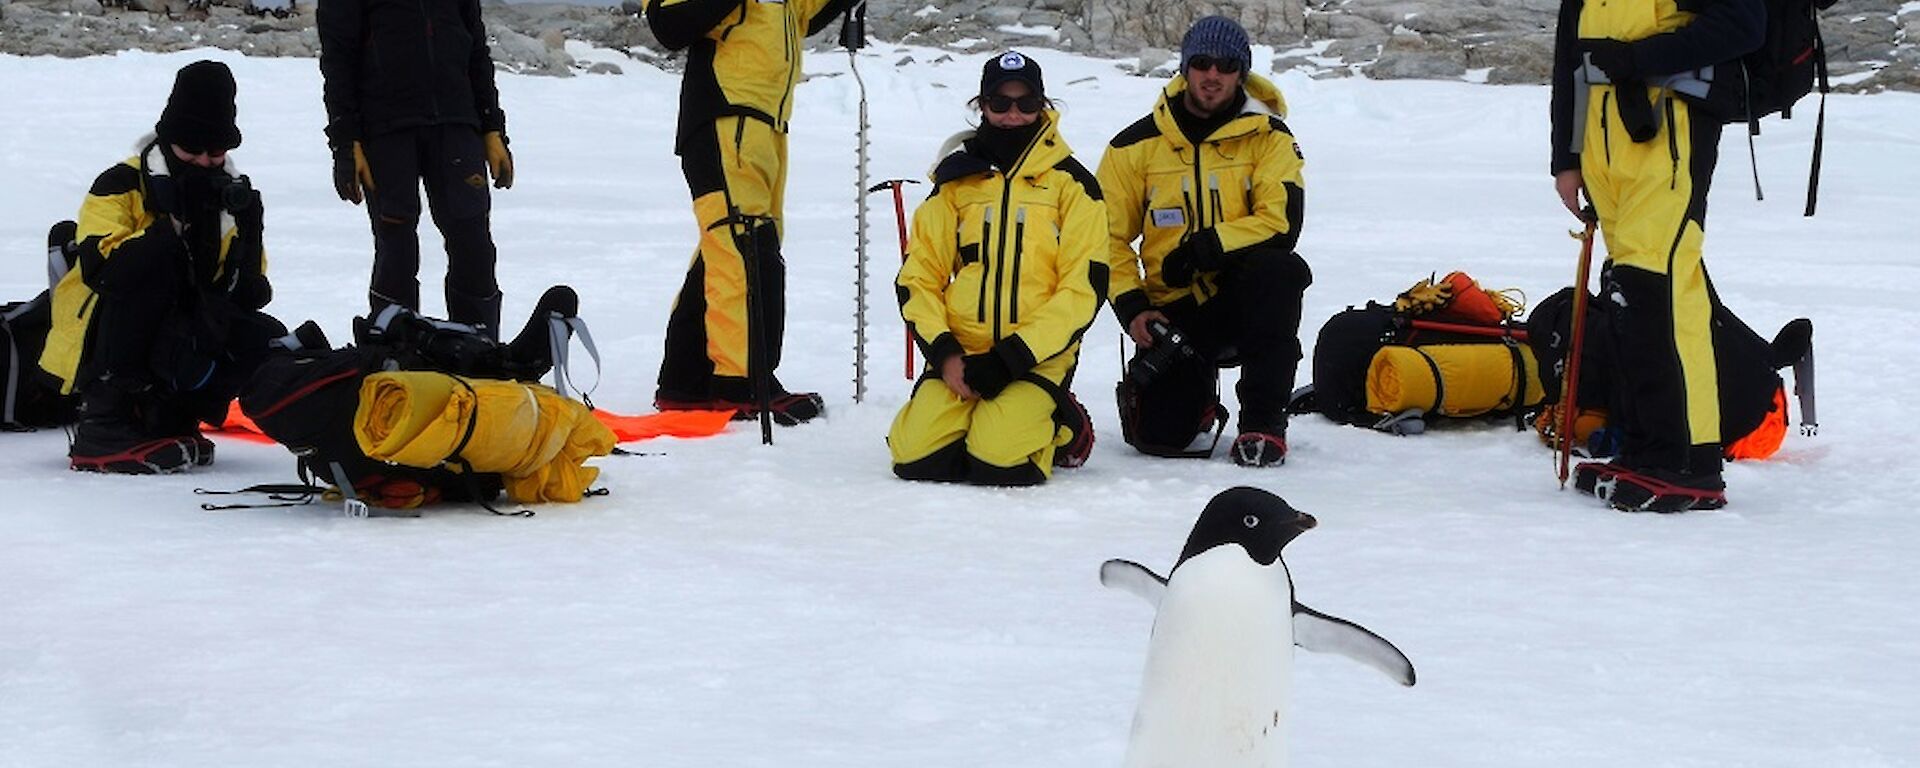 A penguin waddles near a group of expeditioners